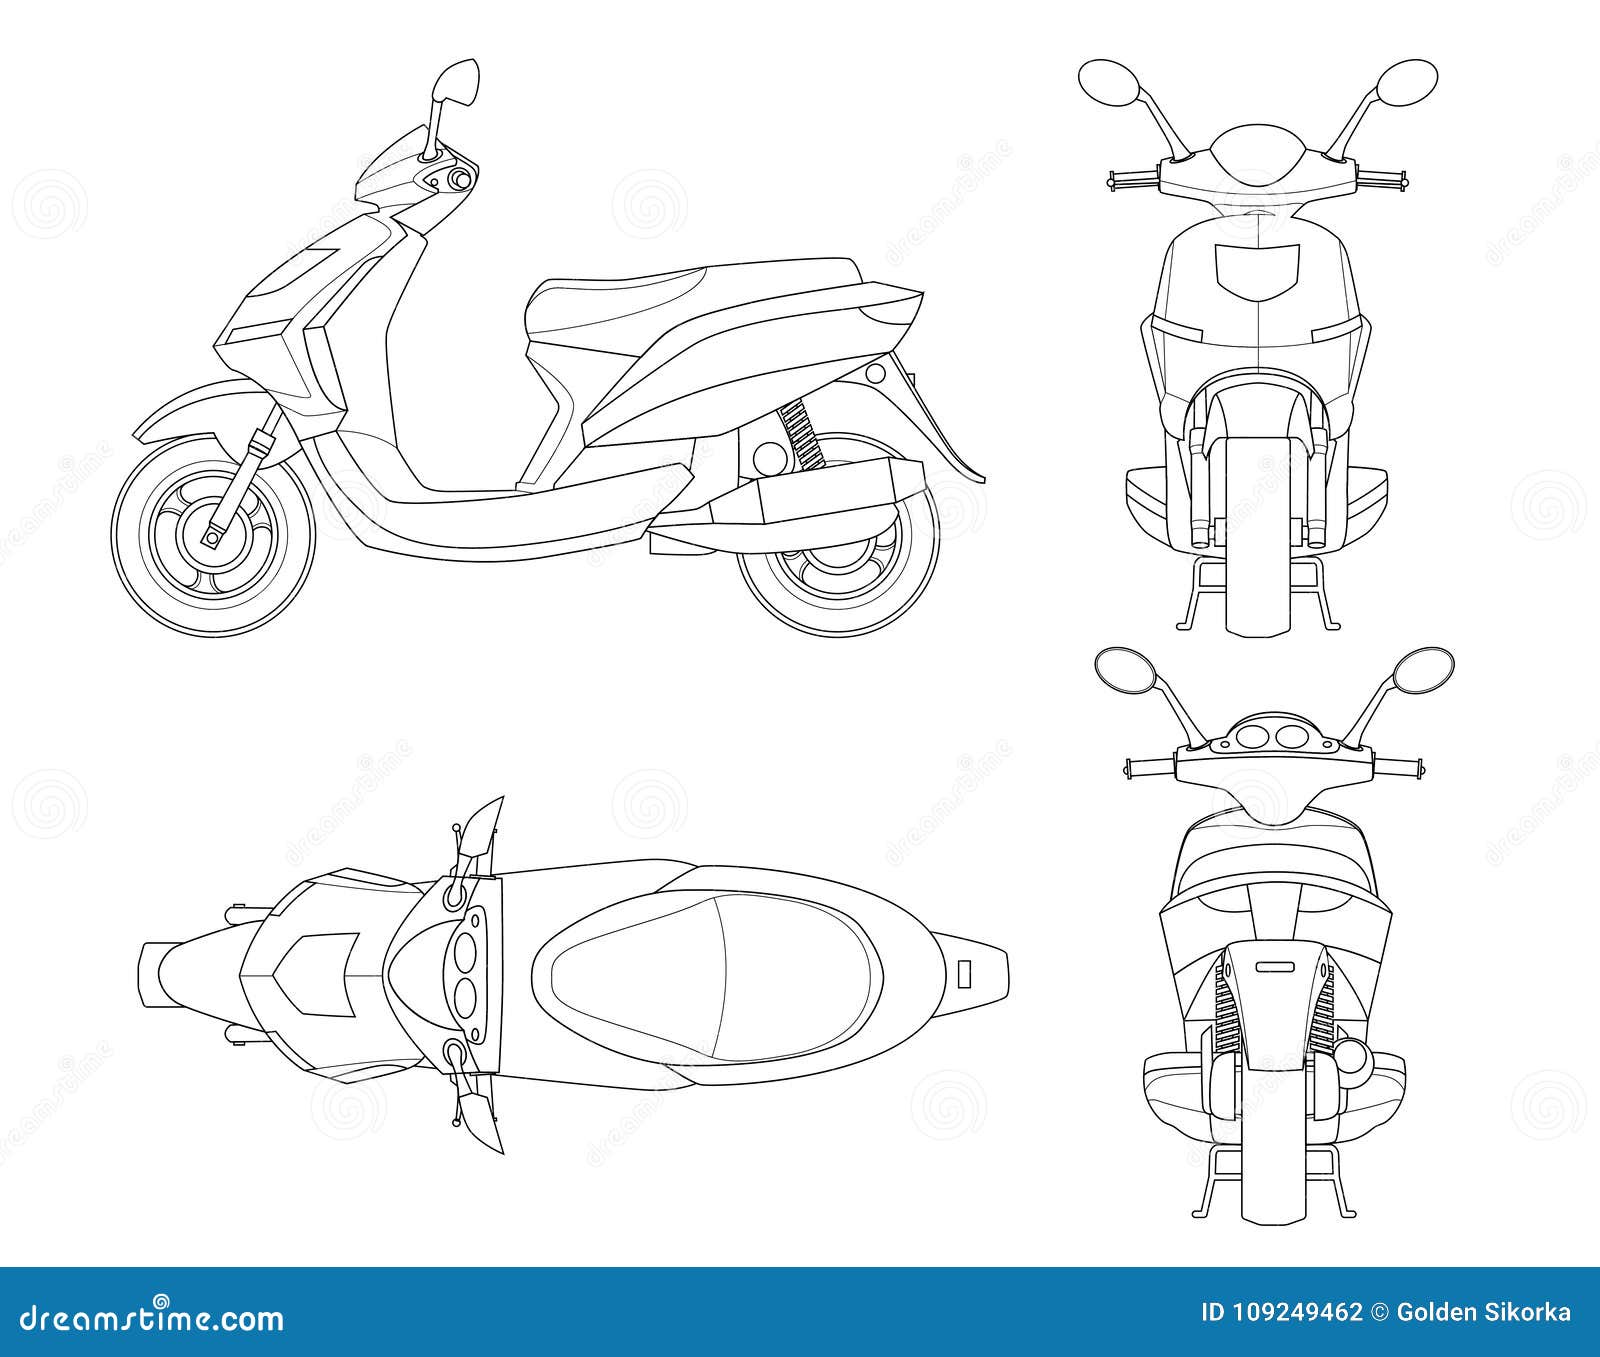 trendy scooter outline  on white background.  motorbike template for moped, motorbike branding and